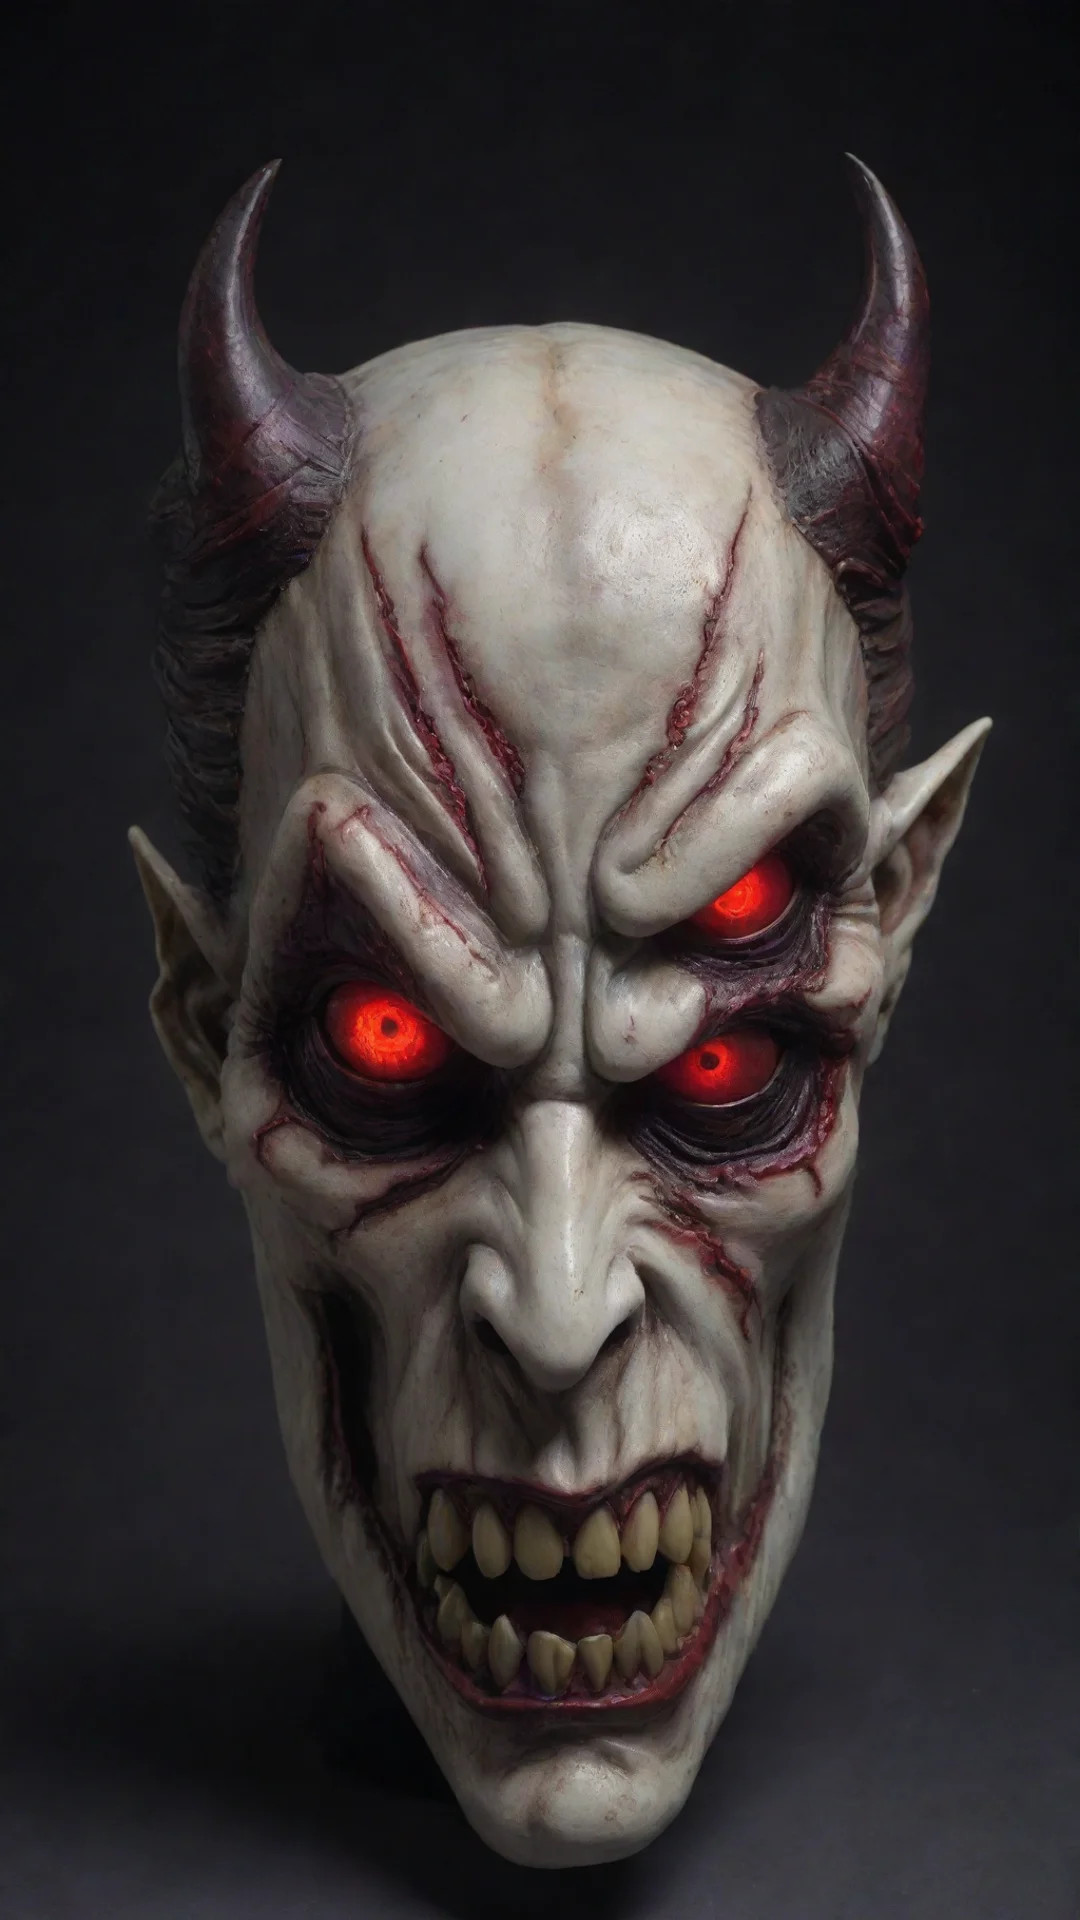 aiamazing an evil mask demon with glowing red eyes and a porcelain finish awesome portrait 2 tall